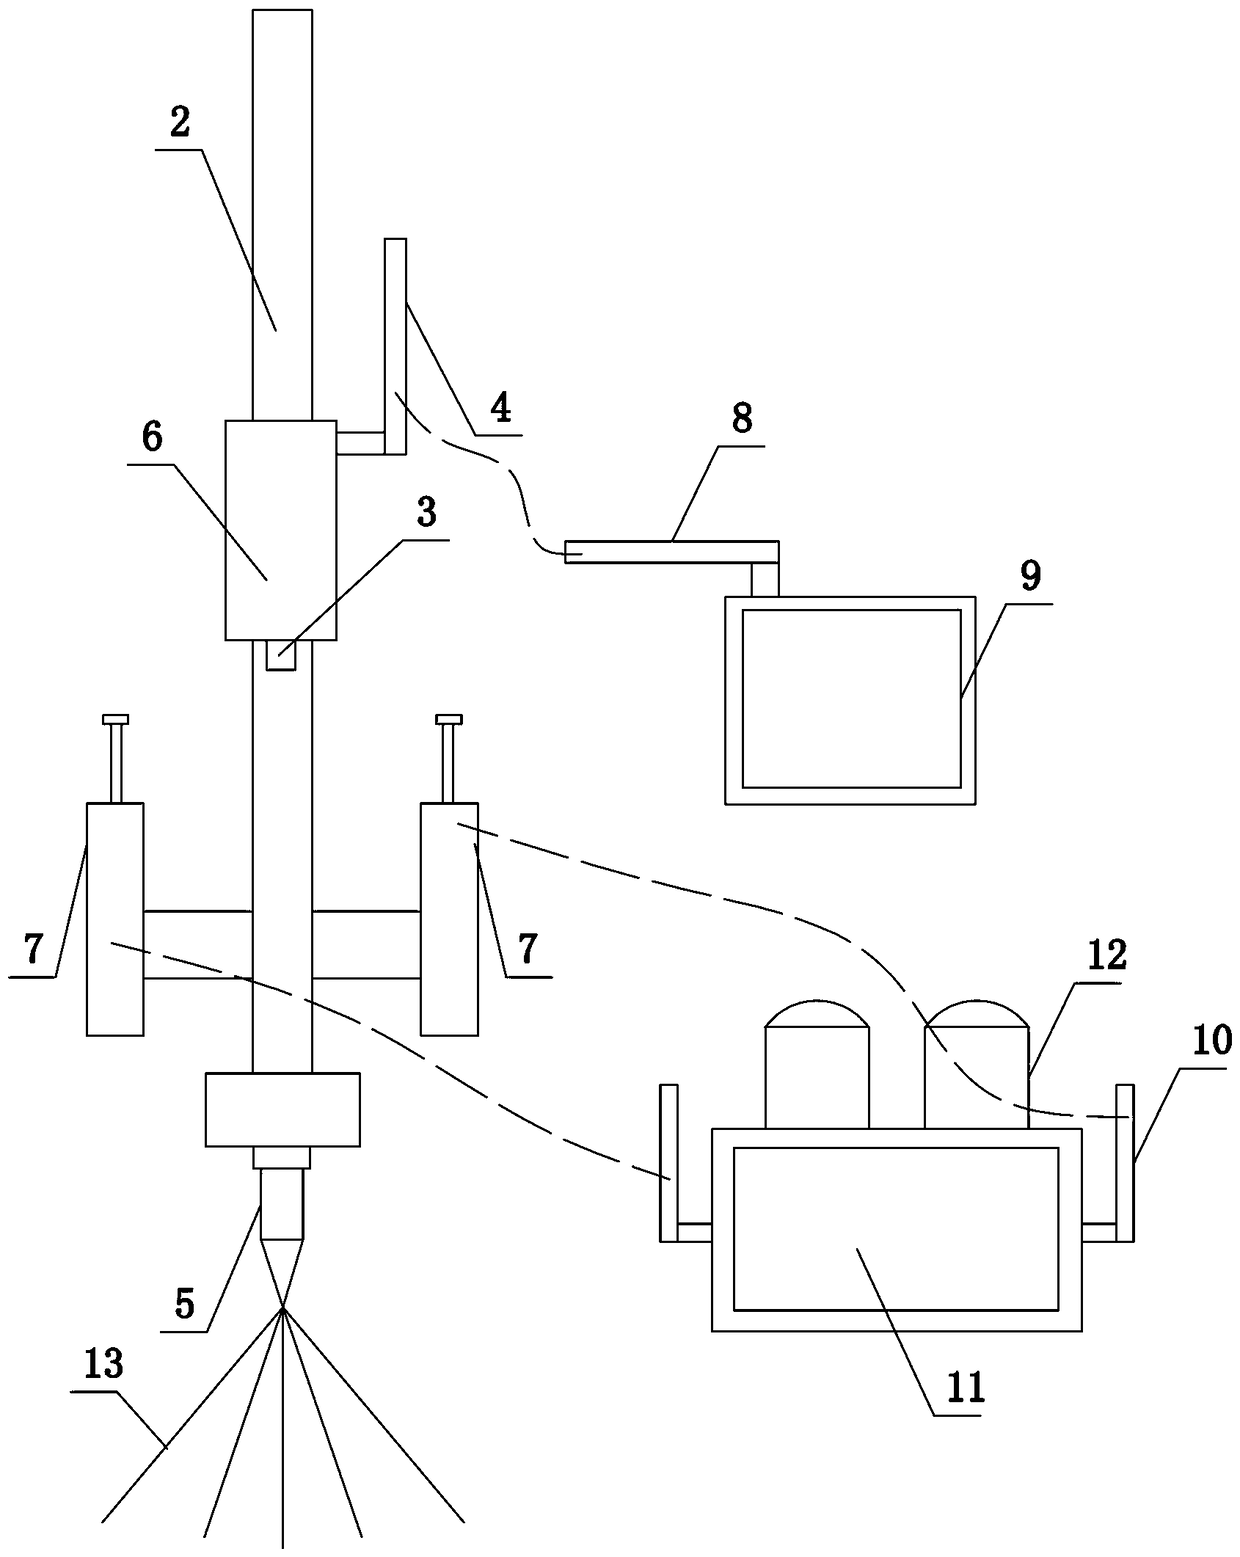 Unmanned-aerial-vehicle-carried power transmission line electroscope device